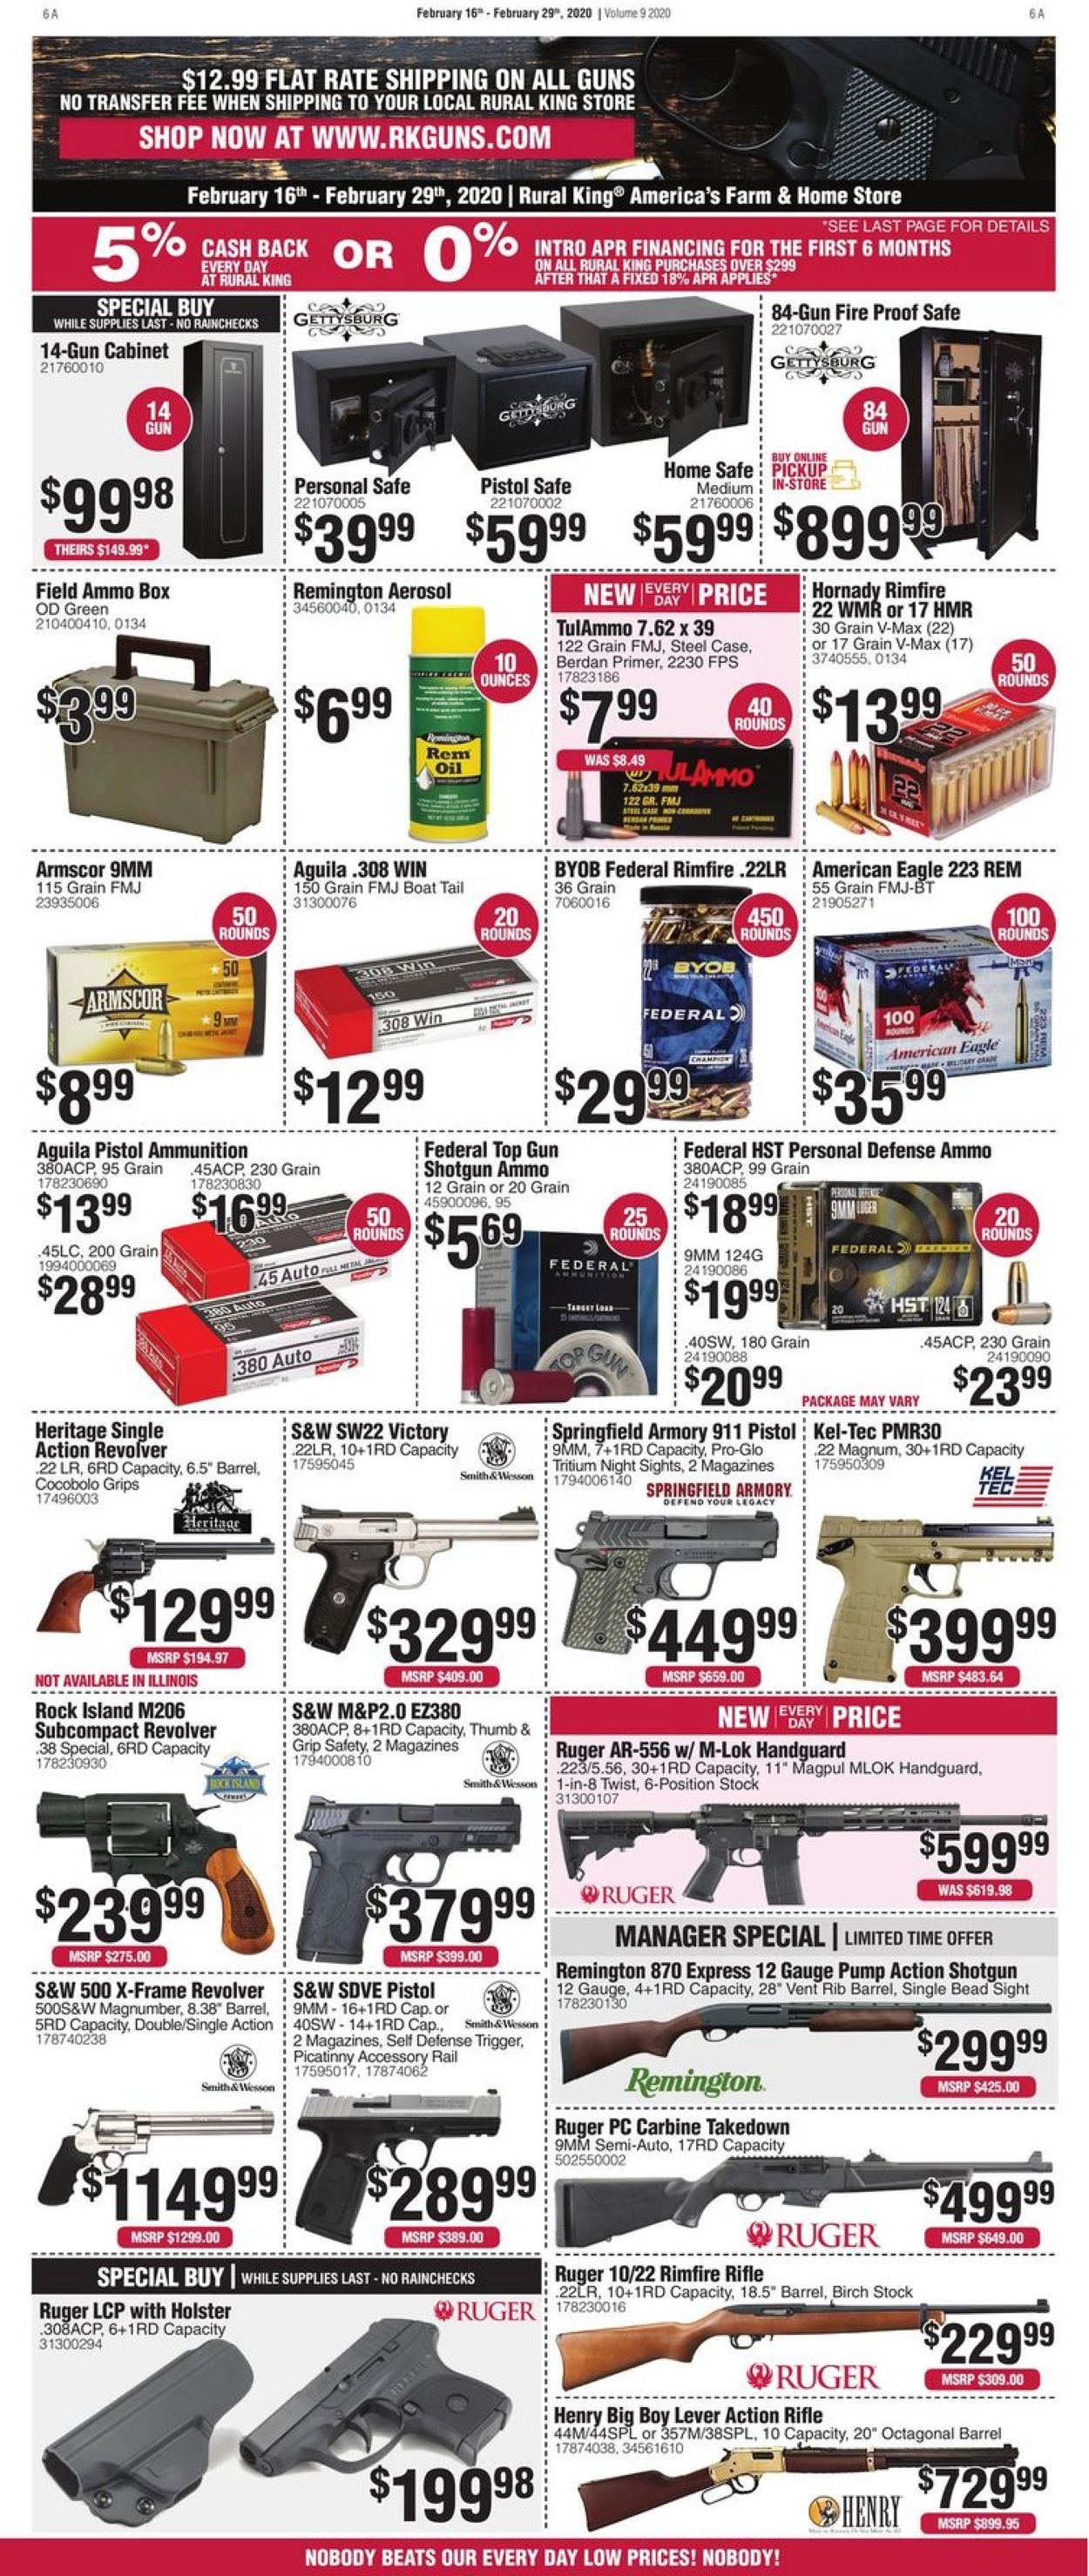 Rural King Current weekly ad 02/16 02/29/2020 [7]